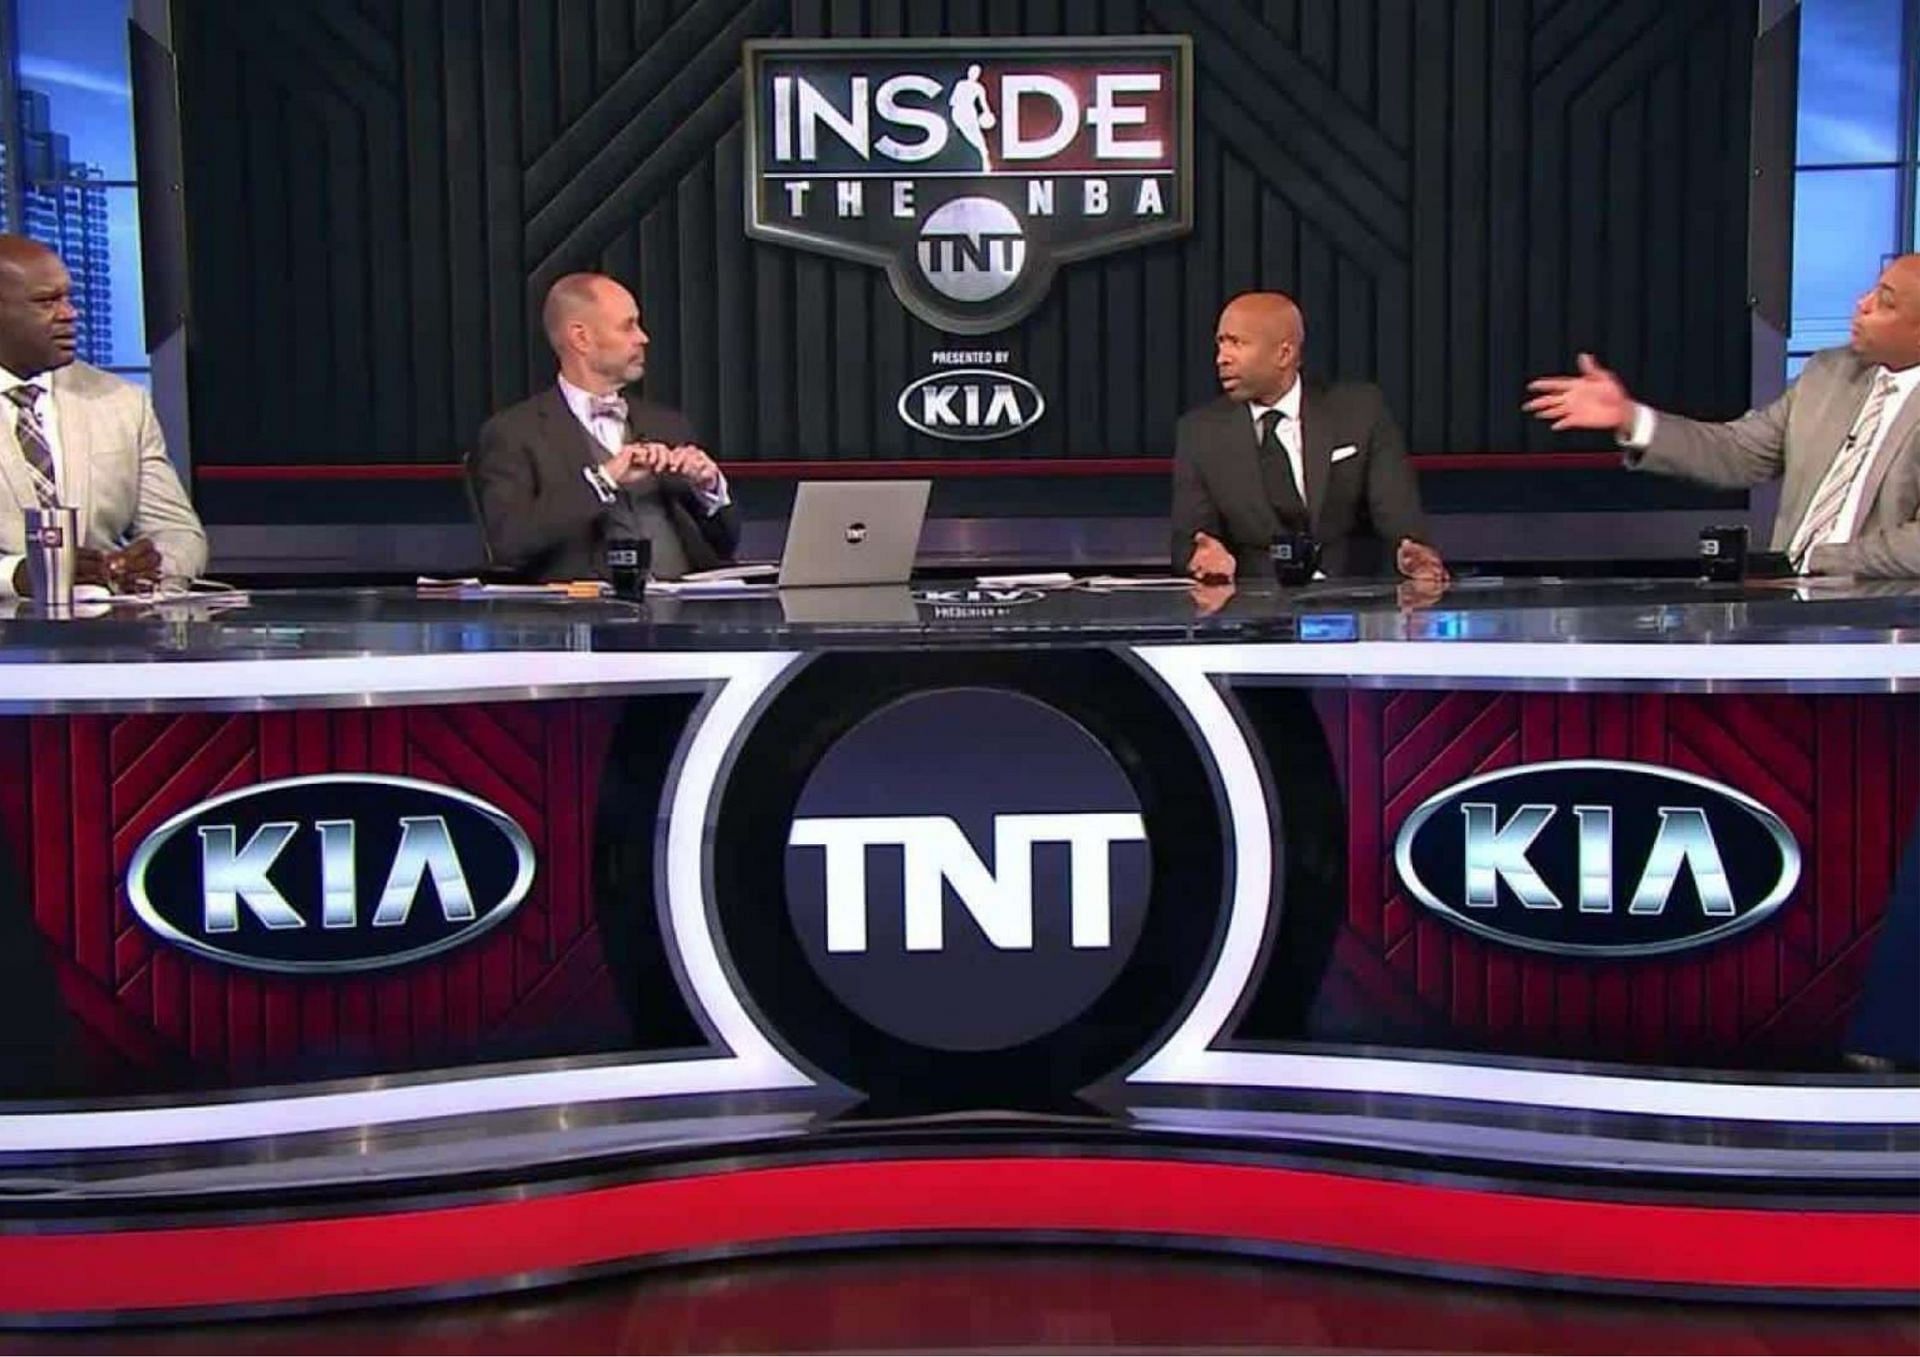 The NBA on TNT hosts were divided about the CBA